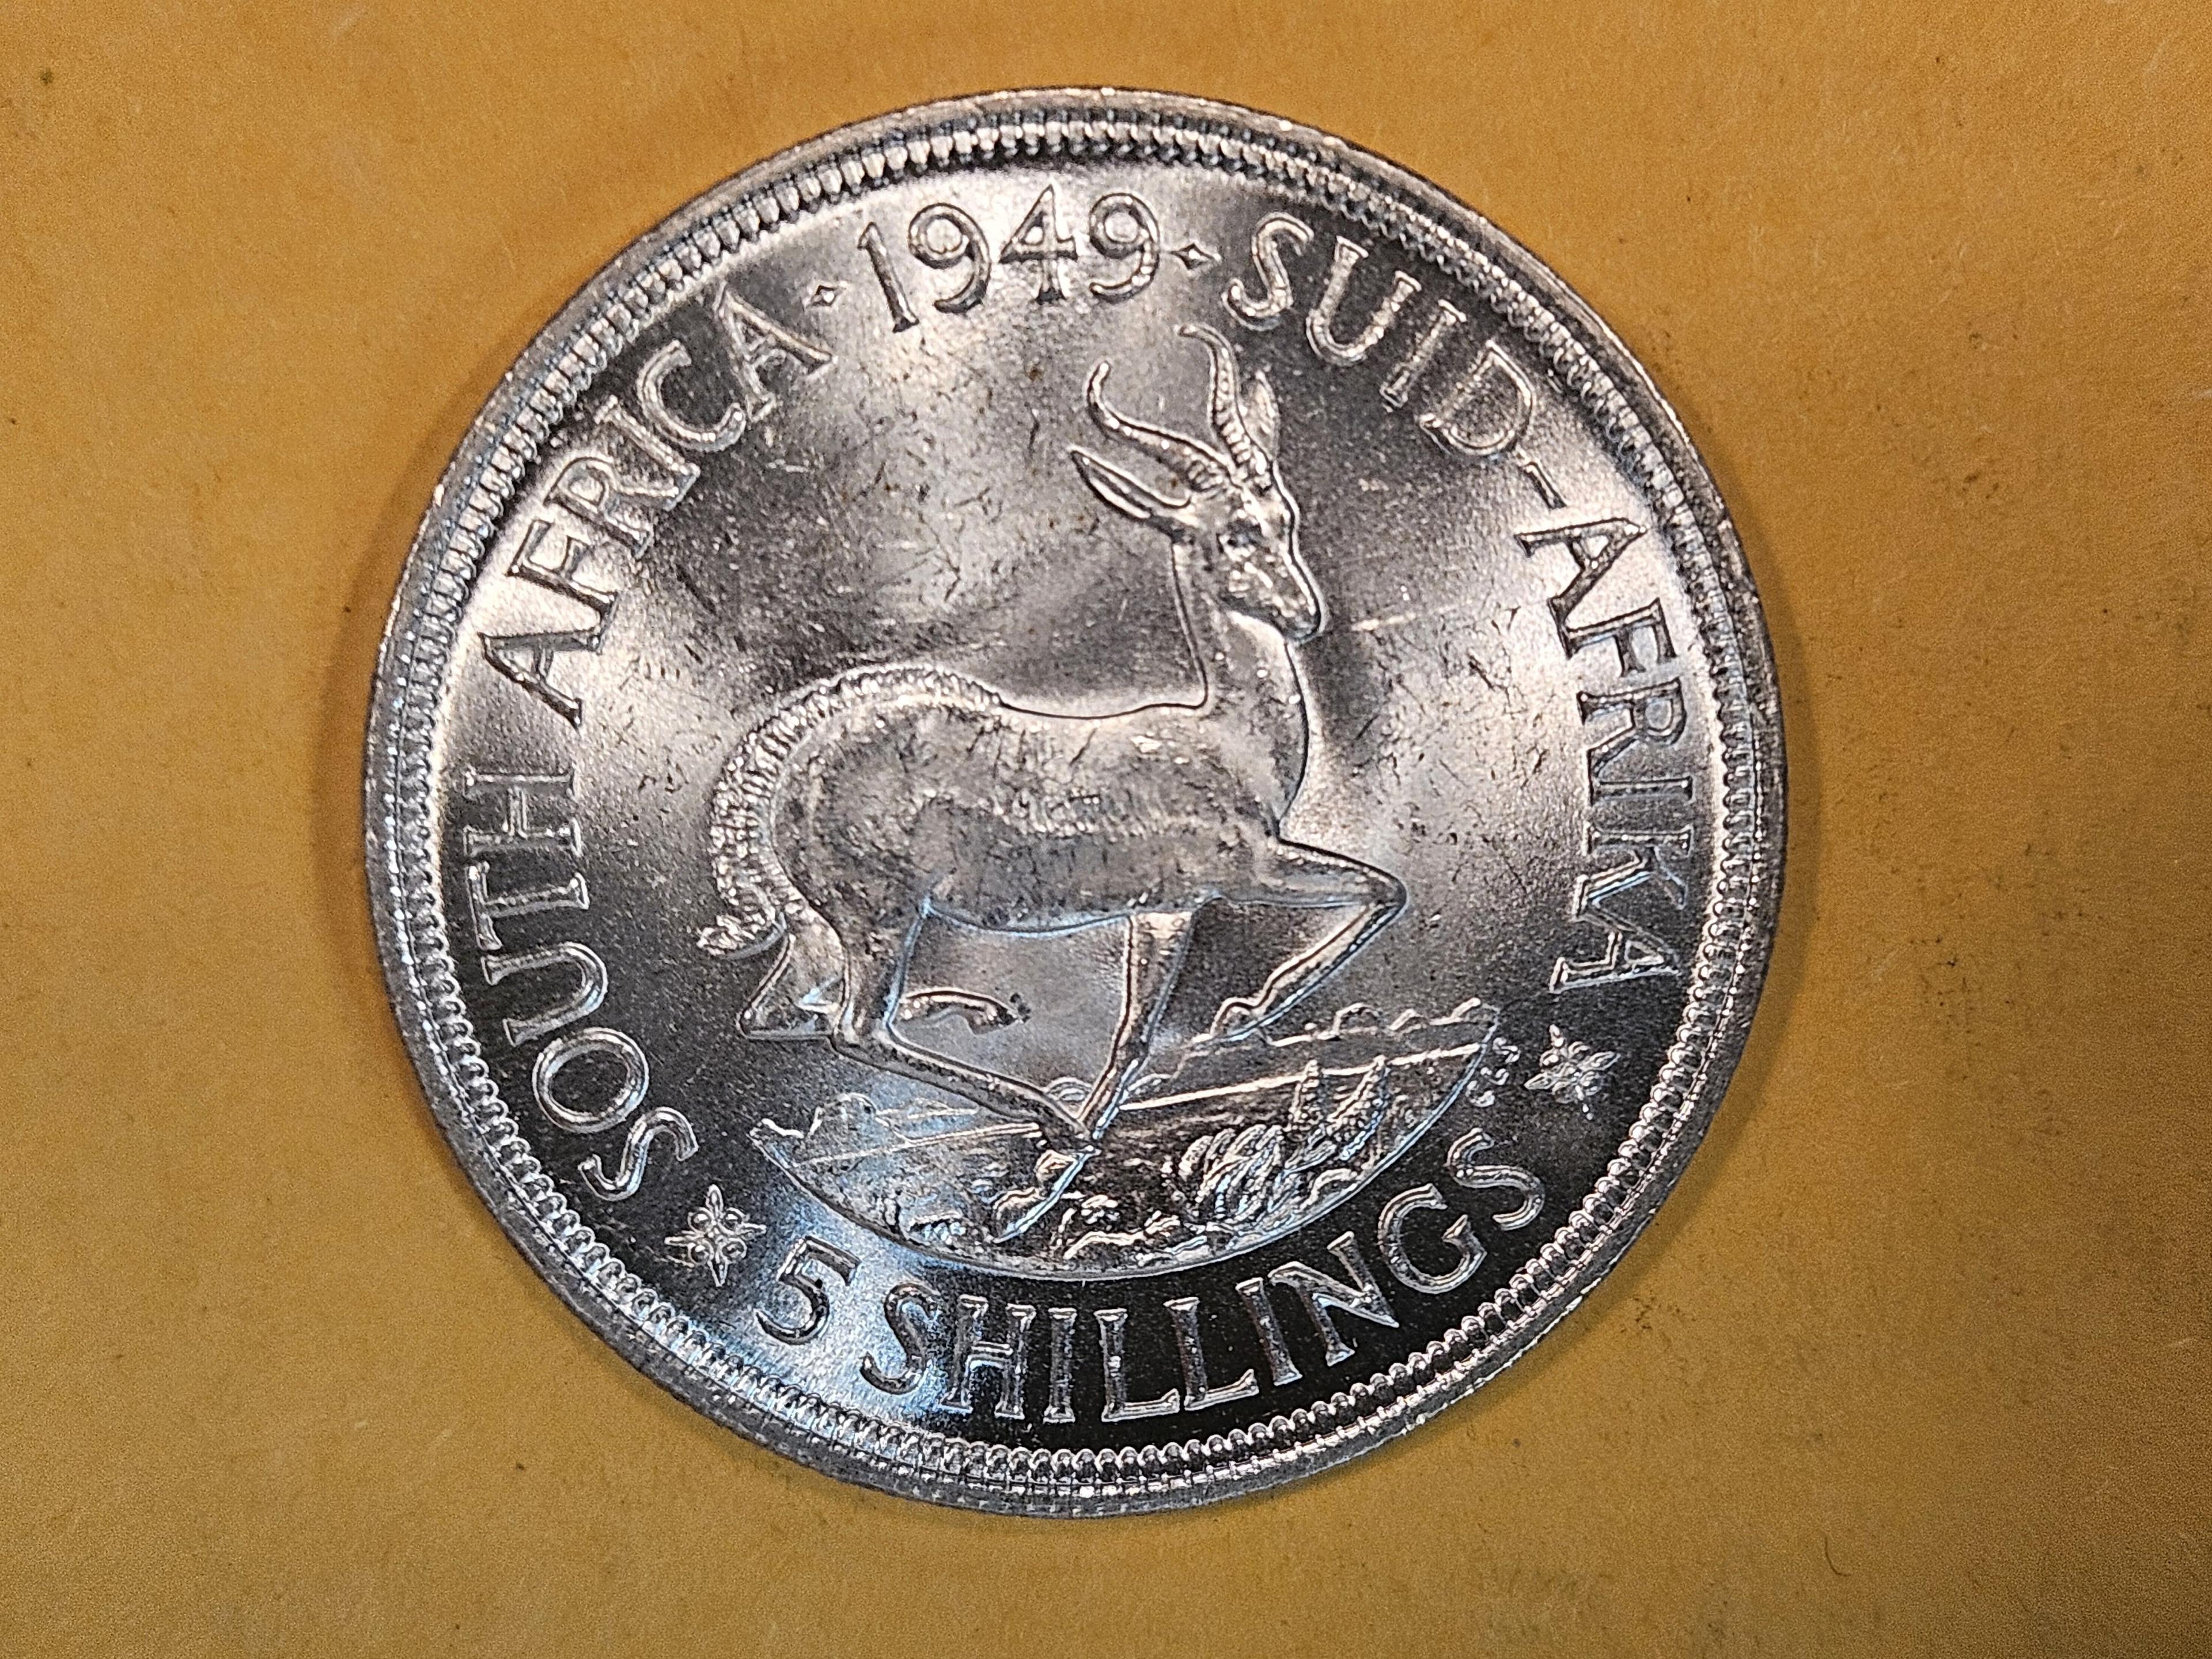 Very Choice Brilliant uncirculated 1949 South Africa silver 5 shillings